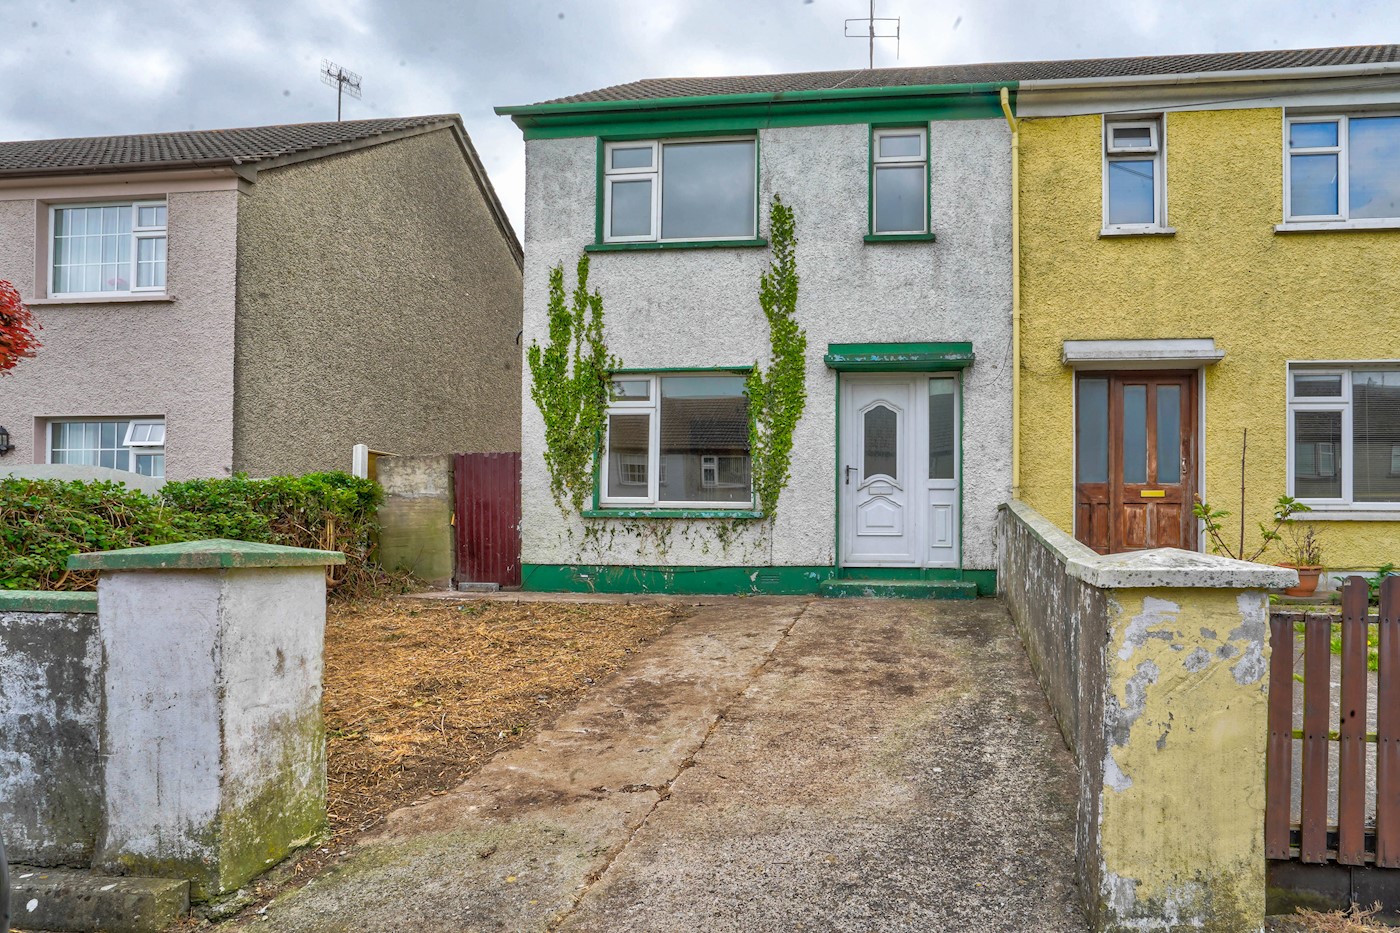 19 Suir Crescent, Mooncoin, Co. Kilkenny, X91 XY01 1/16